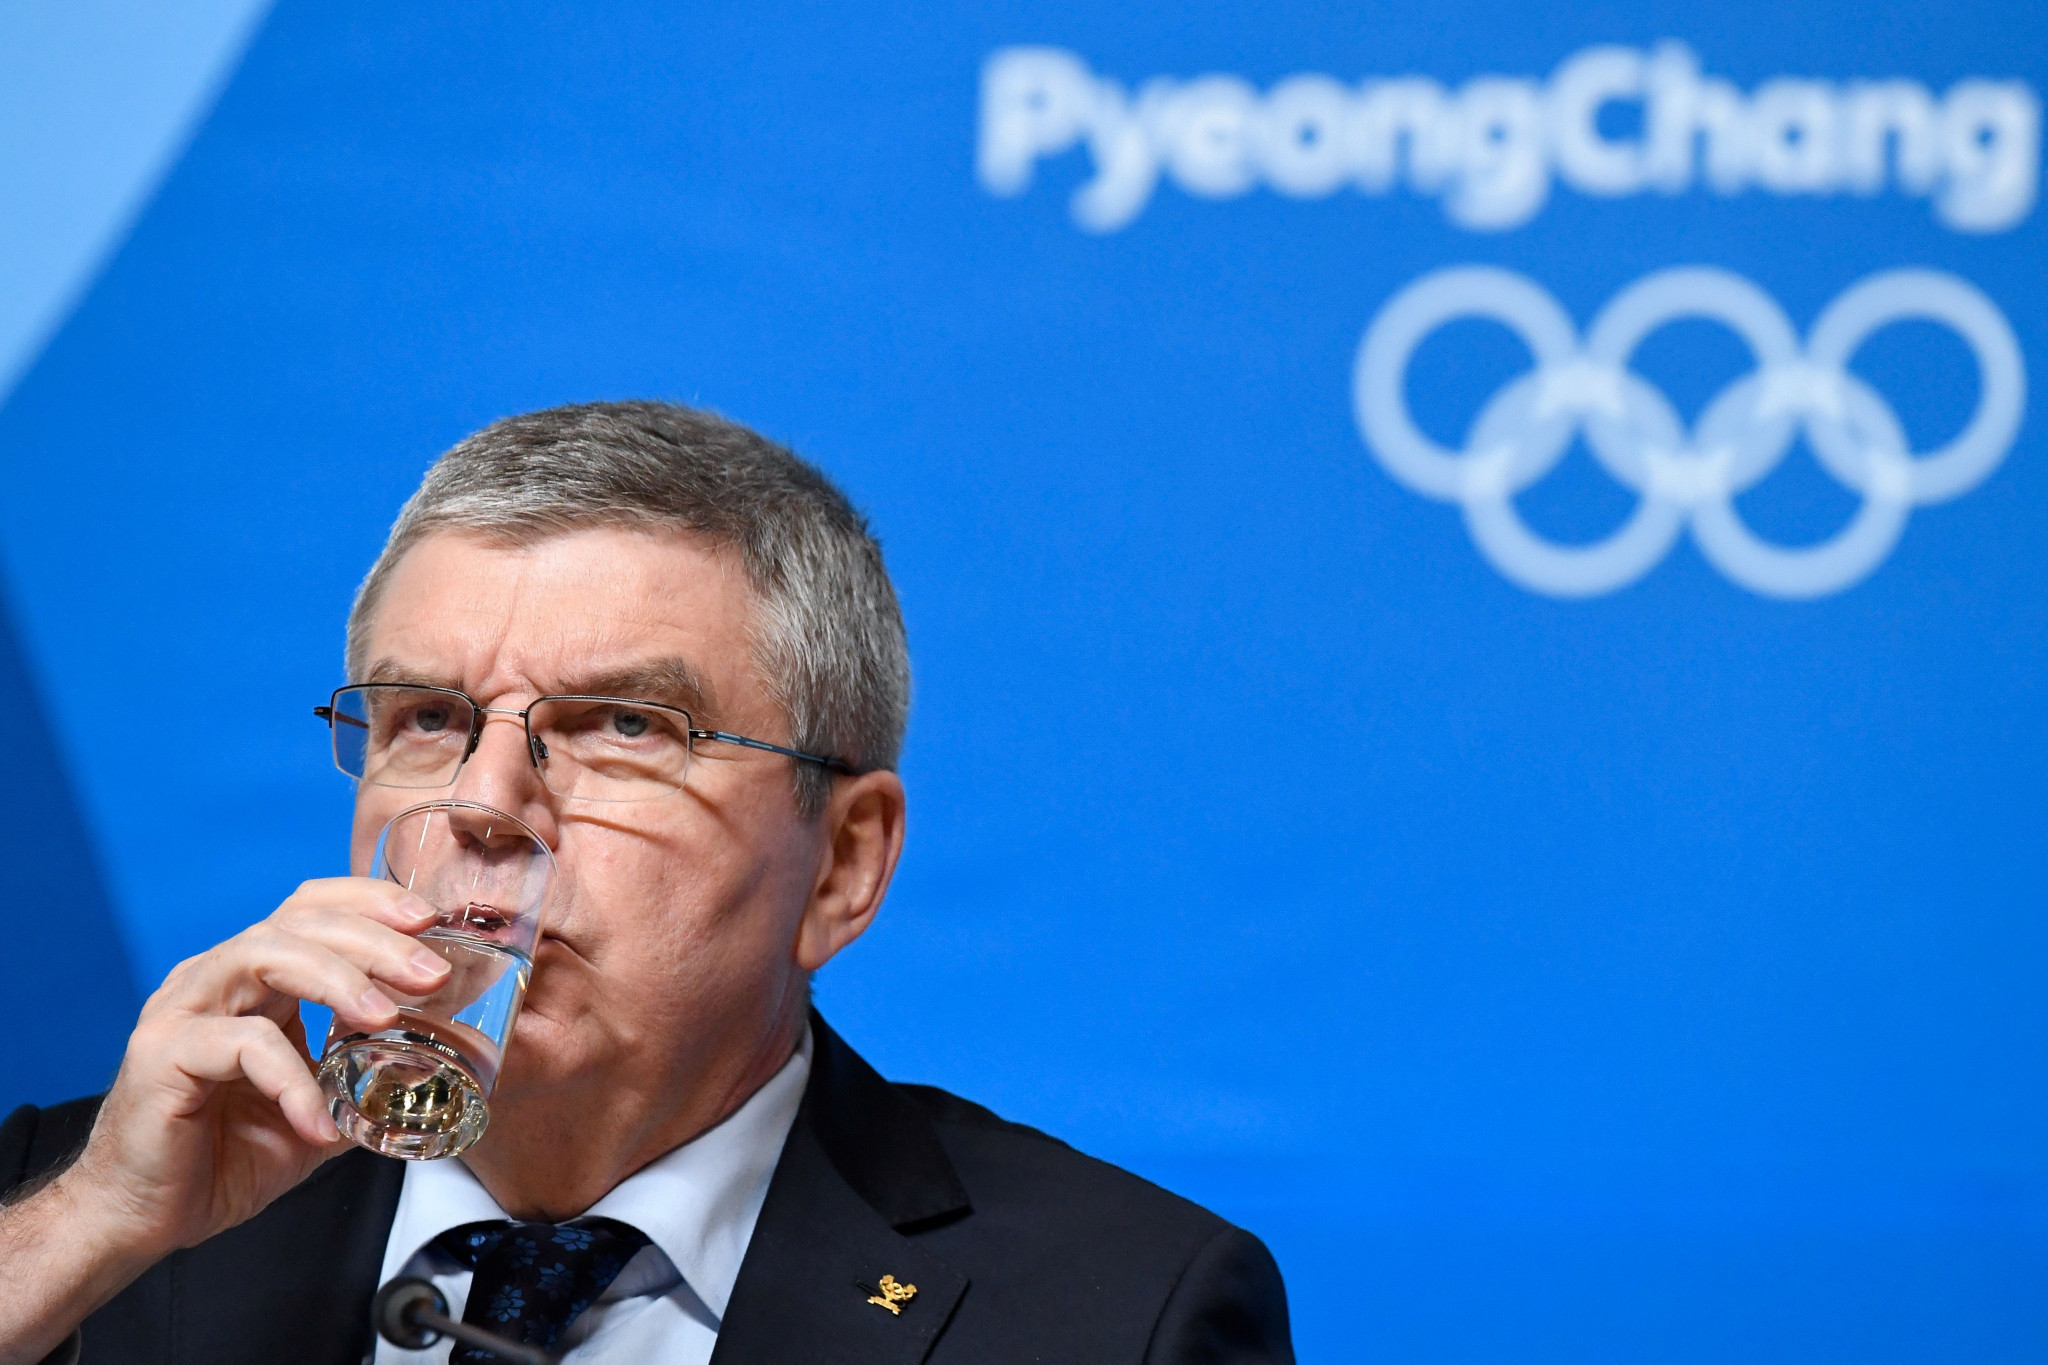 IOC President Thomas Bach stated the organisation could remove boxing from Tokyo 2020 should governance issues not be resolved ©Getty Images